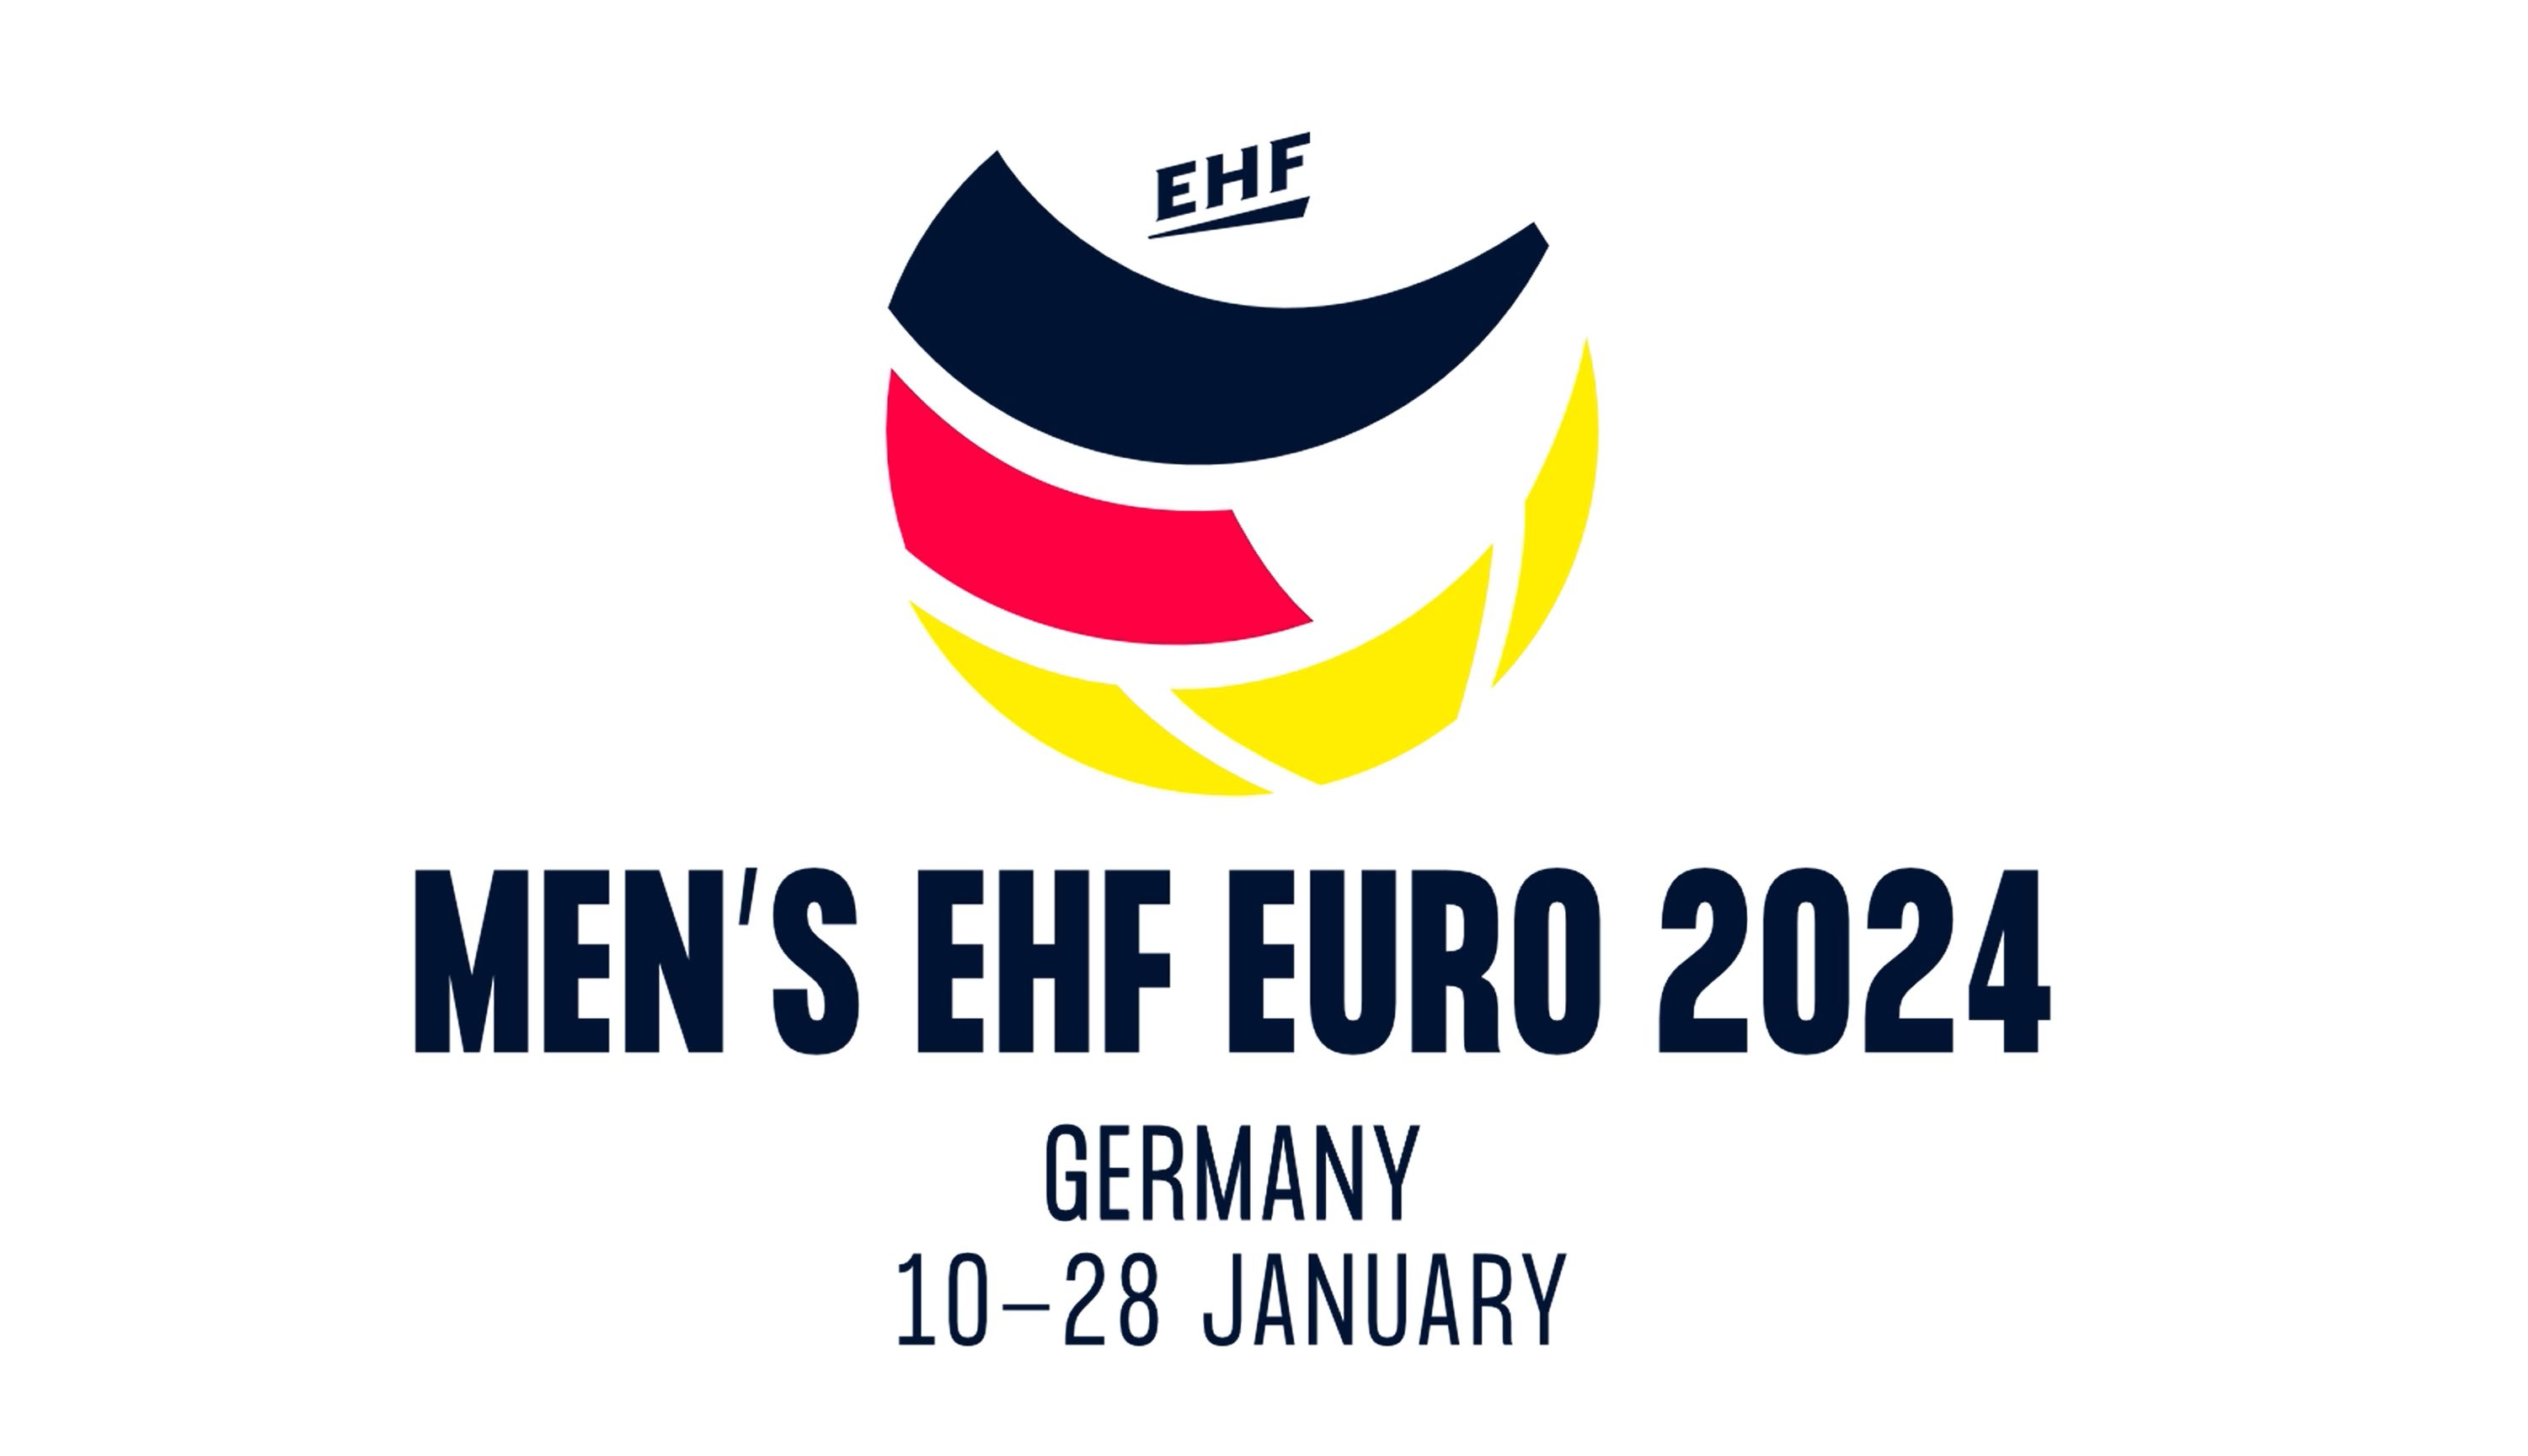 Logo and campaign released for Men’s EHF EURO 2024